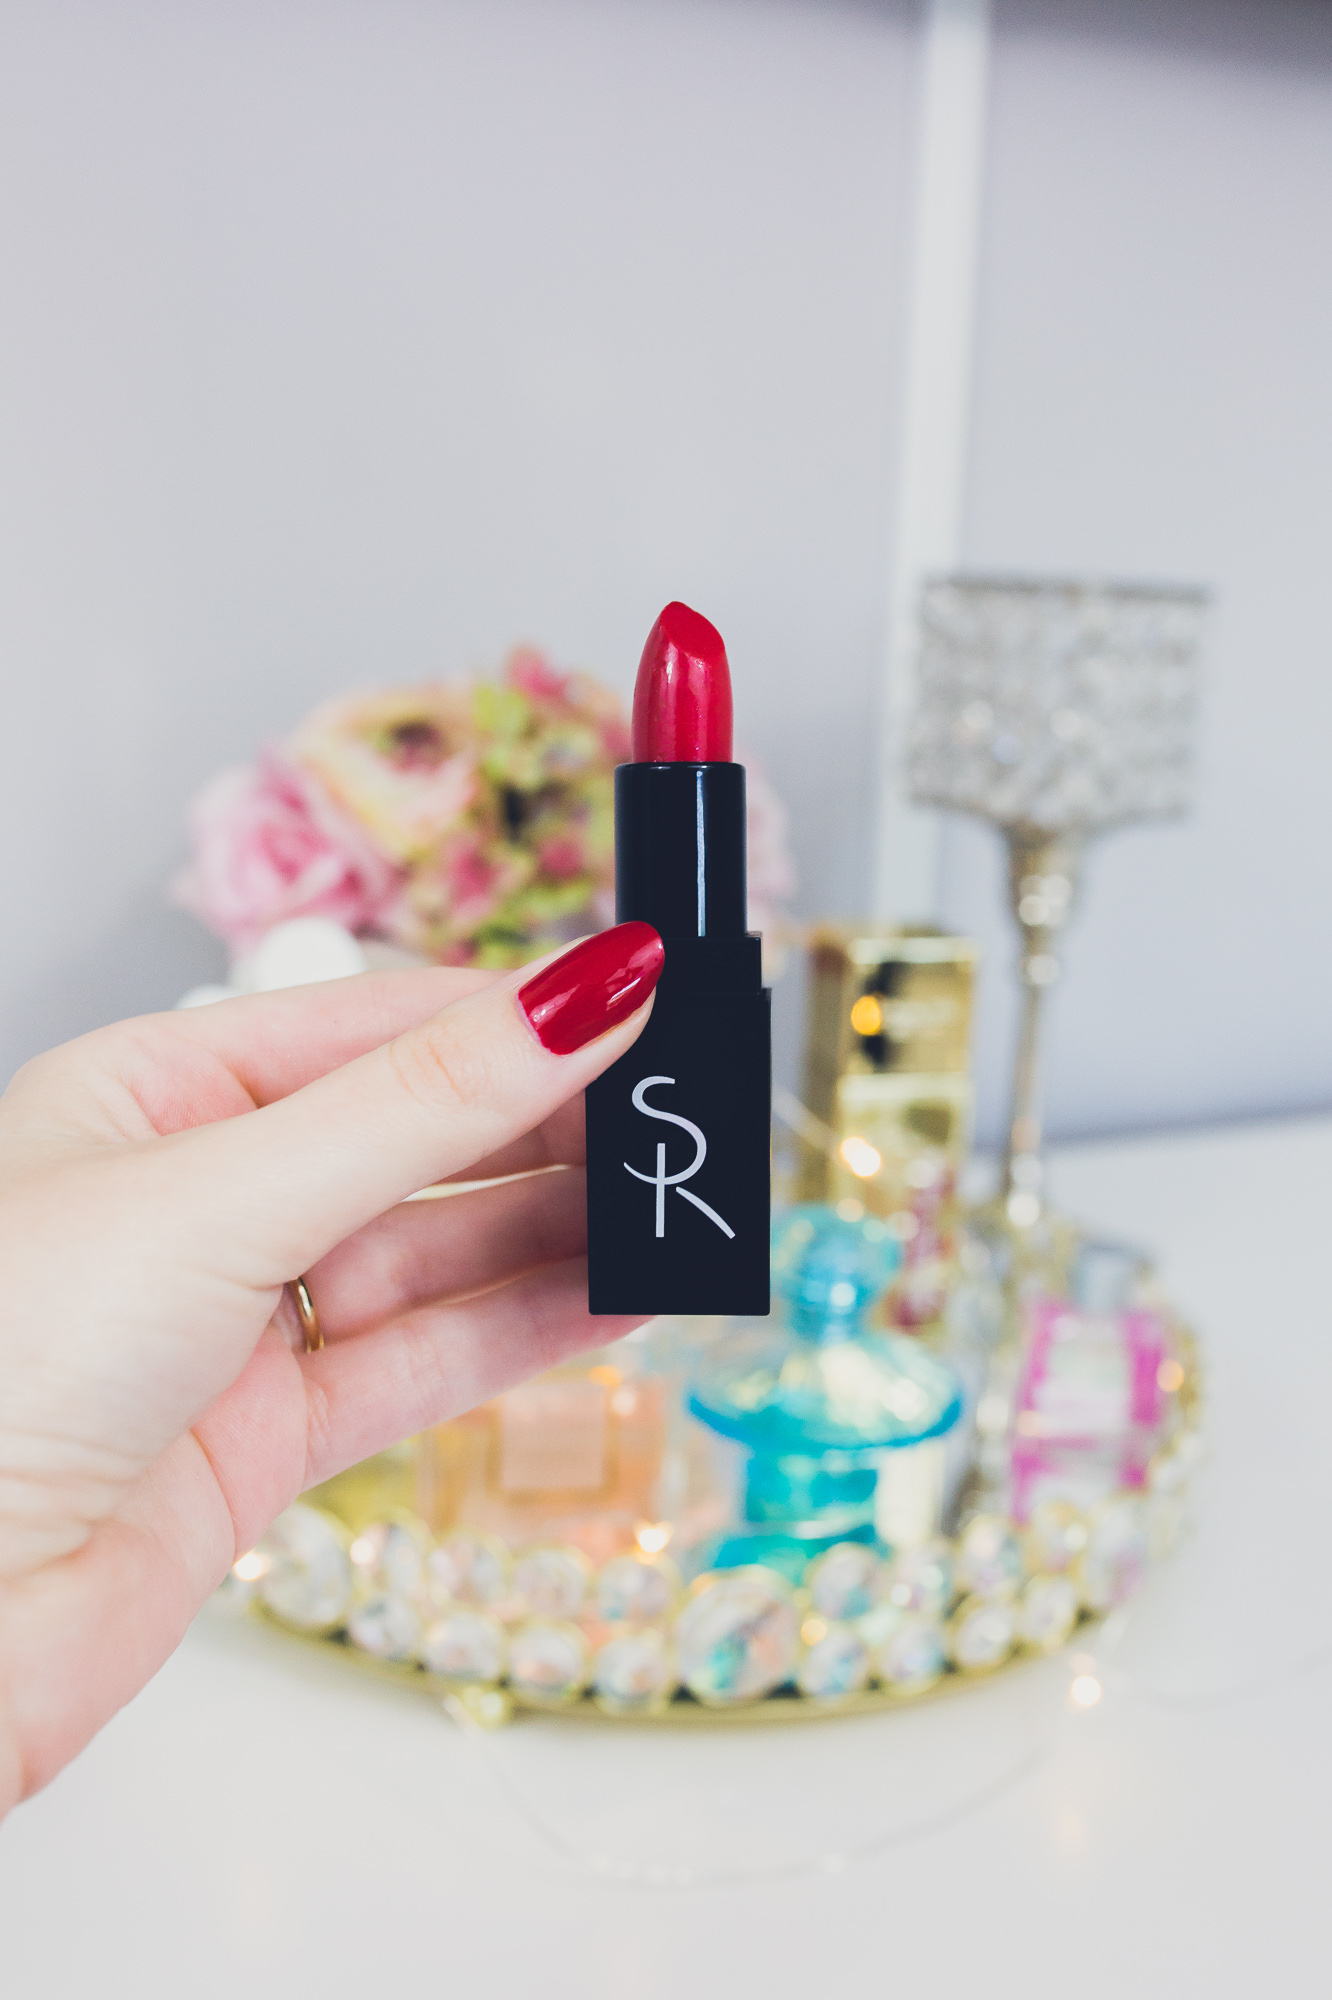 Lifestyle, fashion, and beauty blogger and vlogger Jessica Linn from Linn Style collaborating with SummerReign Cosmetics, a local Durham North Carolina lipstick company started by Ashley Summerville using all natural organic ingredients. Red Lipstick the color Crave.